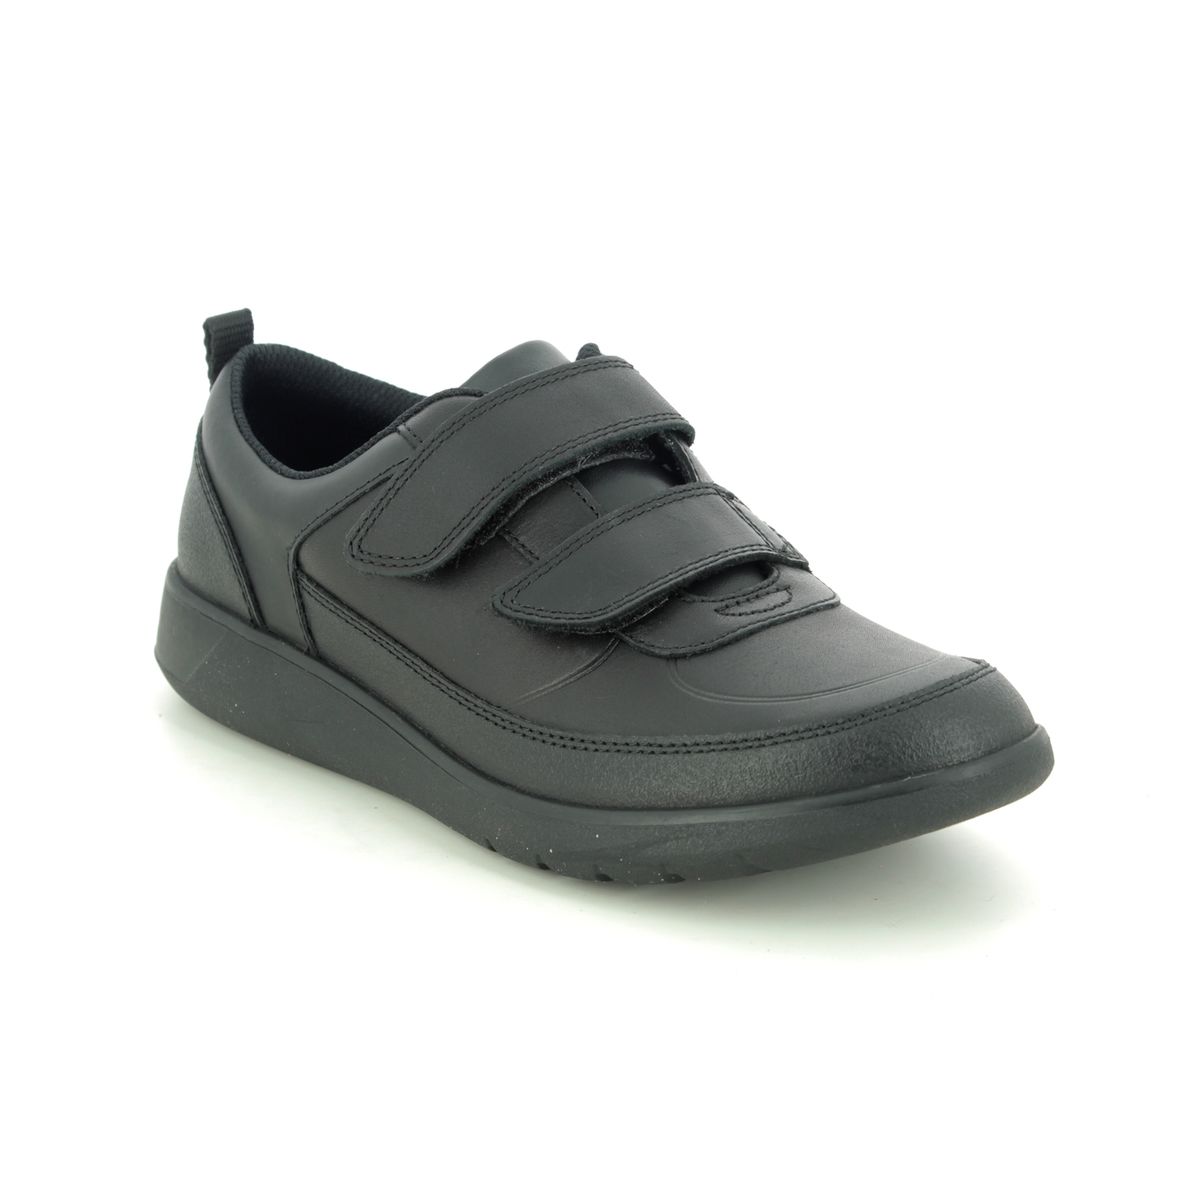 Clarks Scape Flare Y Black Leather Kids Boys Shoes 494097G In Size 6.5 In Plain Black Leather G Width Fitting For School For kids